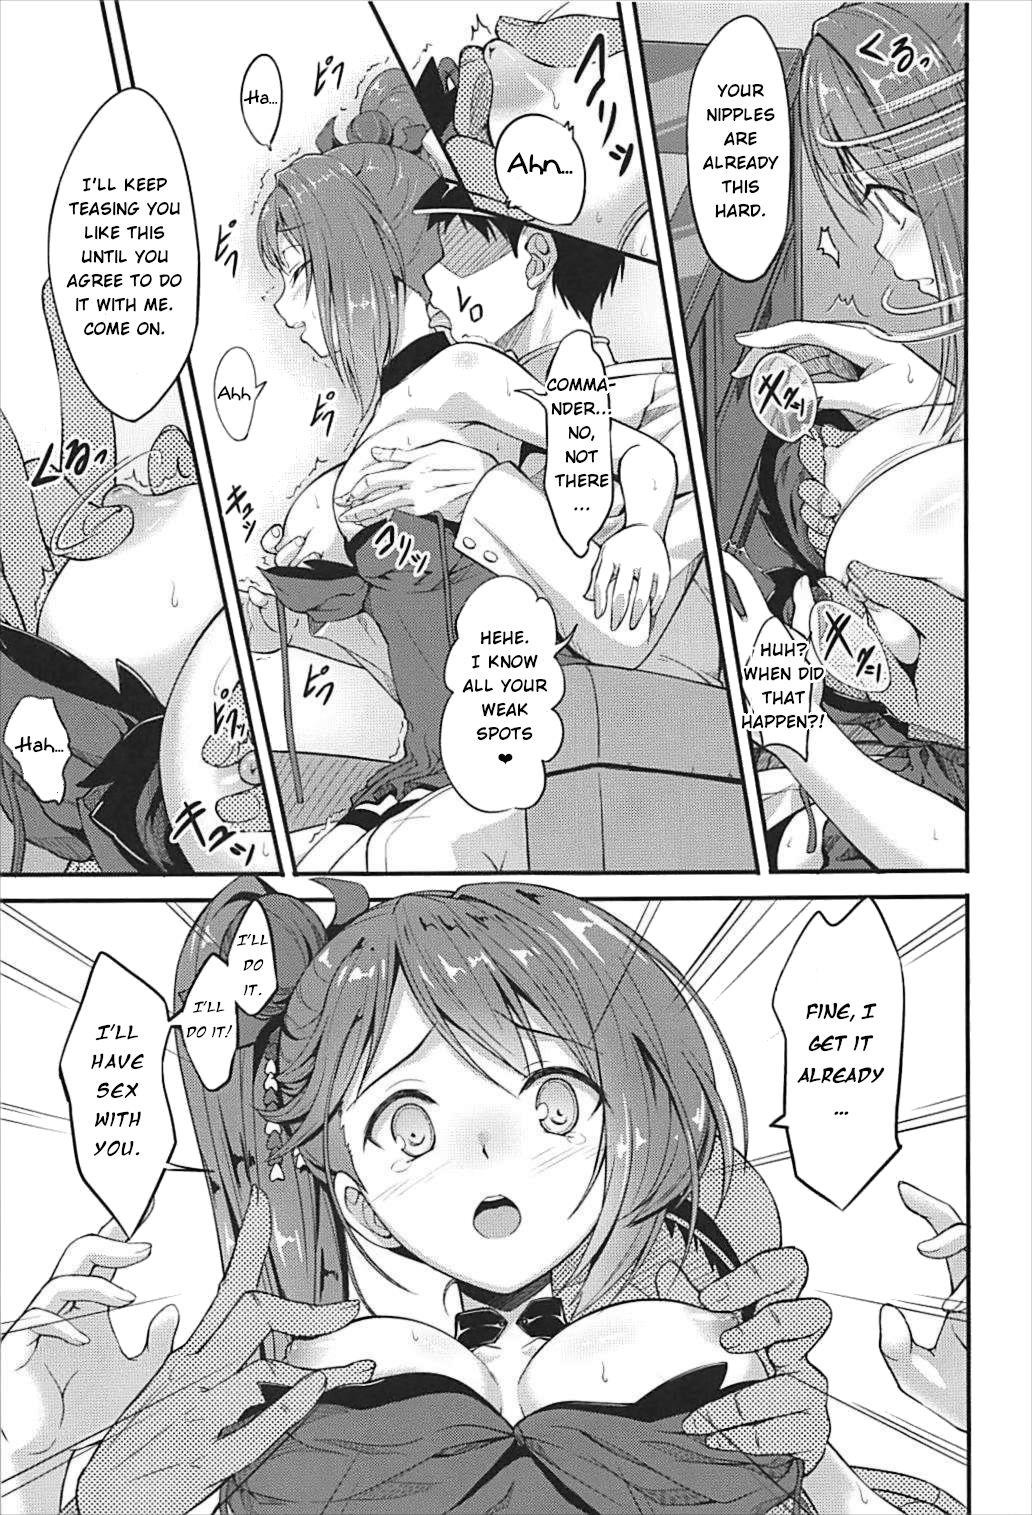 Porno Zui! Zui! Zuitto!! - Azur lane Old Young - Page 4